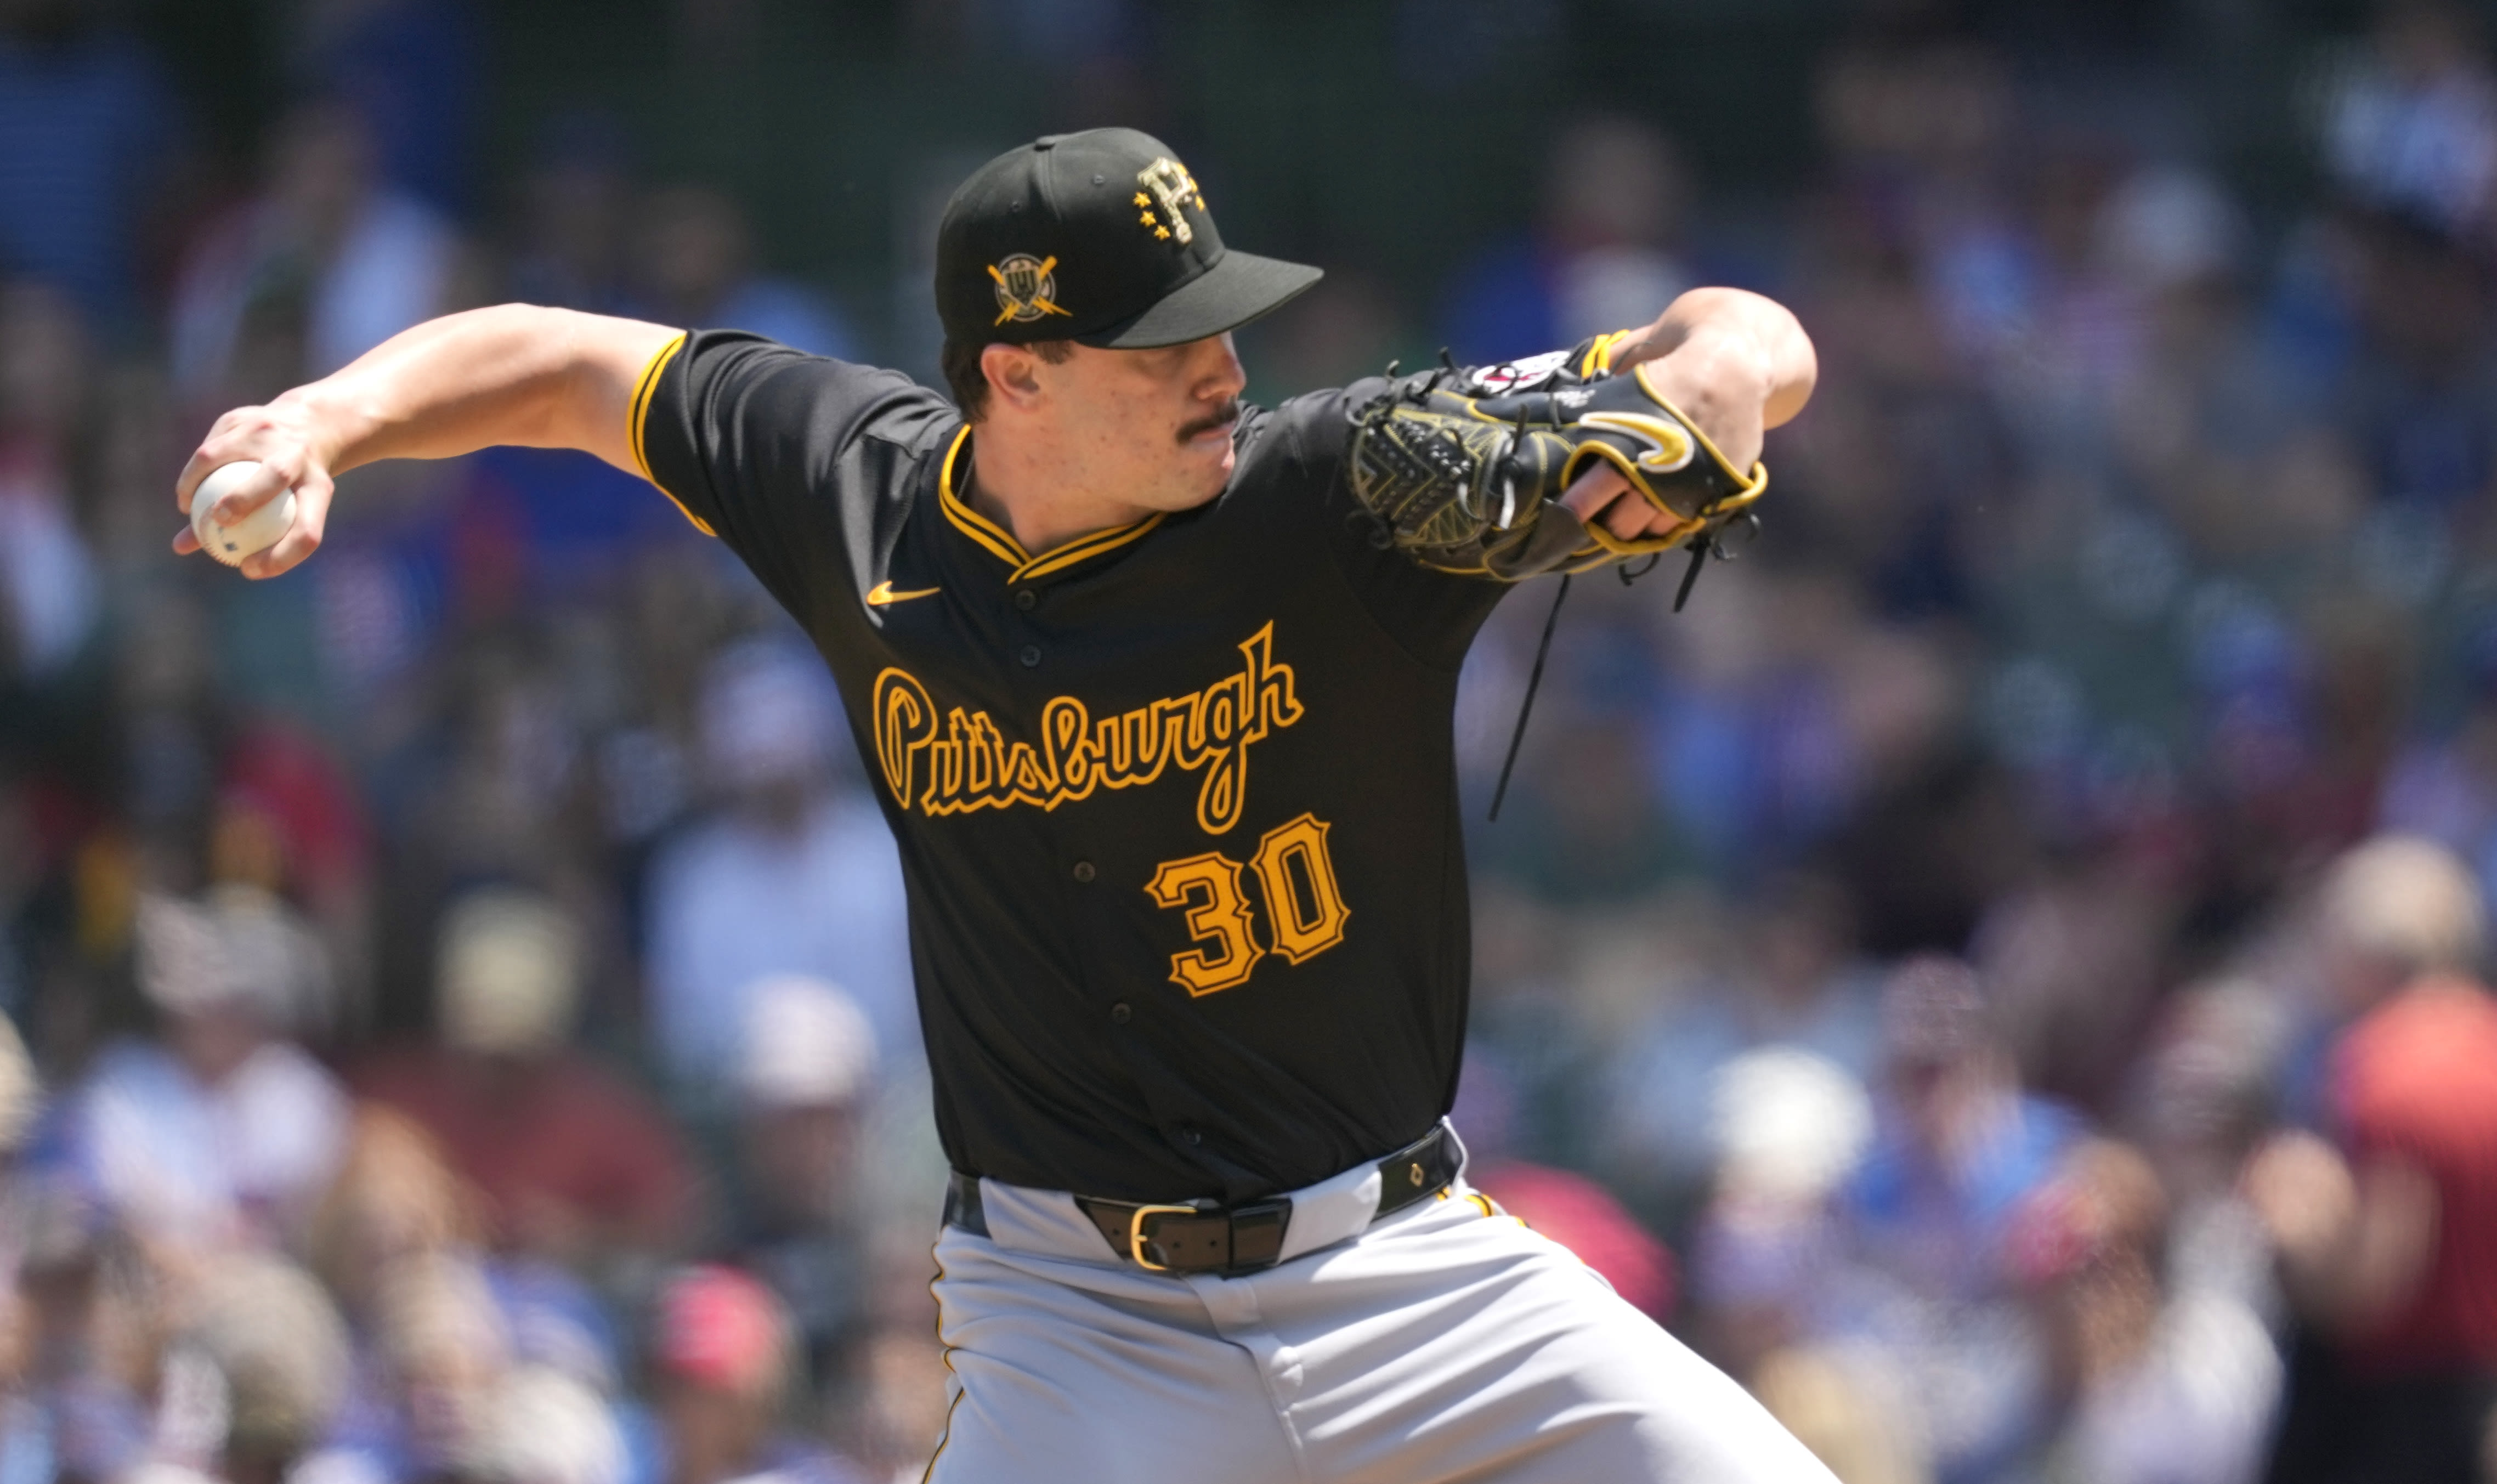 Pirates' Paul Skenes allows no hits in 6 innings, strikes out 11 in second MLB start